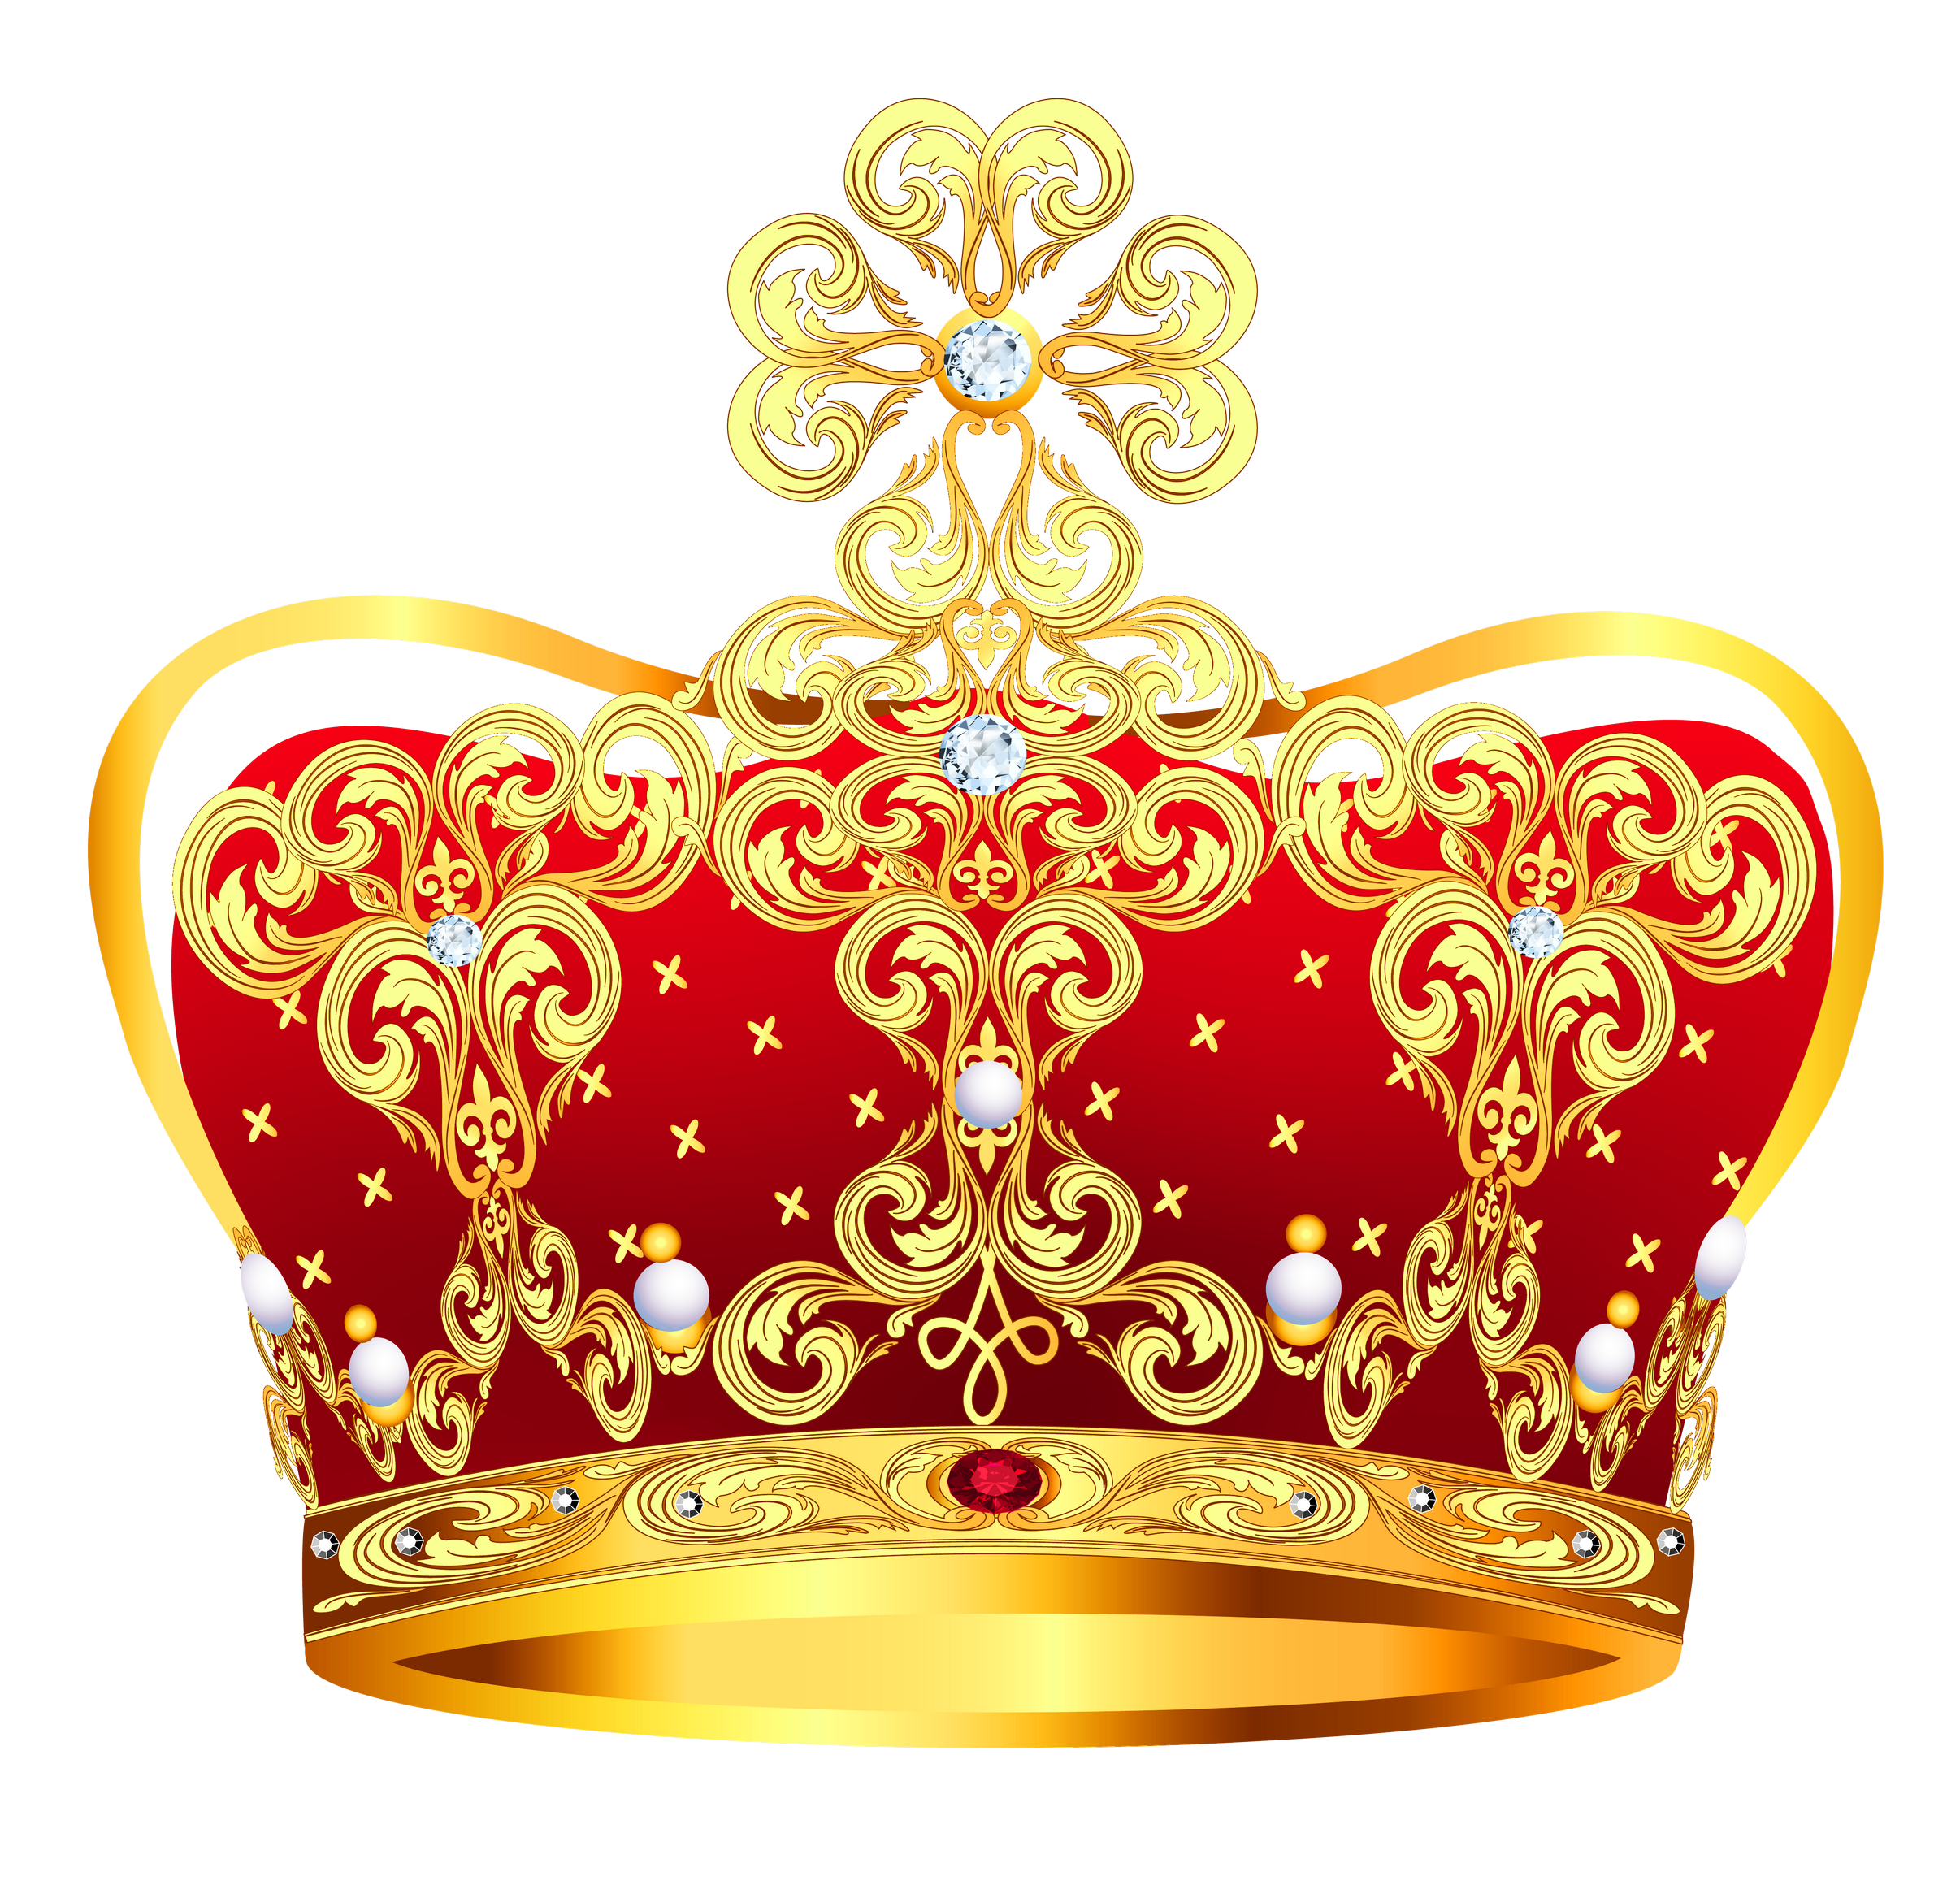 Gold & Red Crown